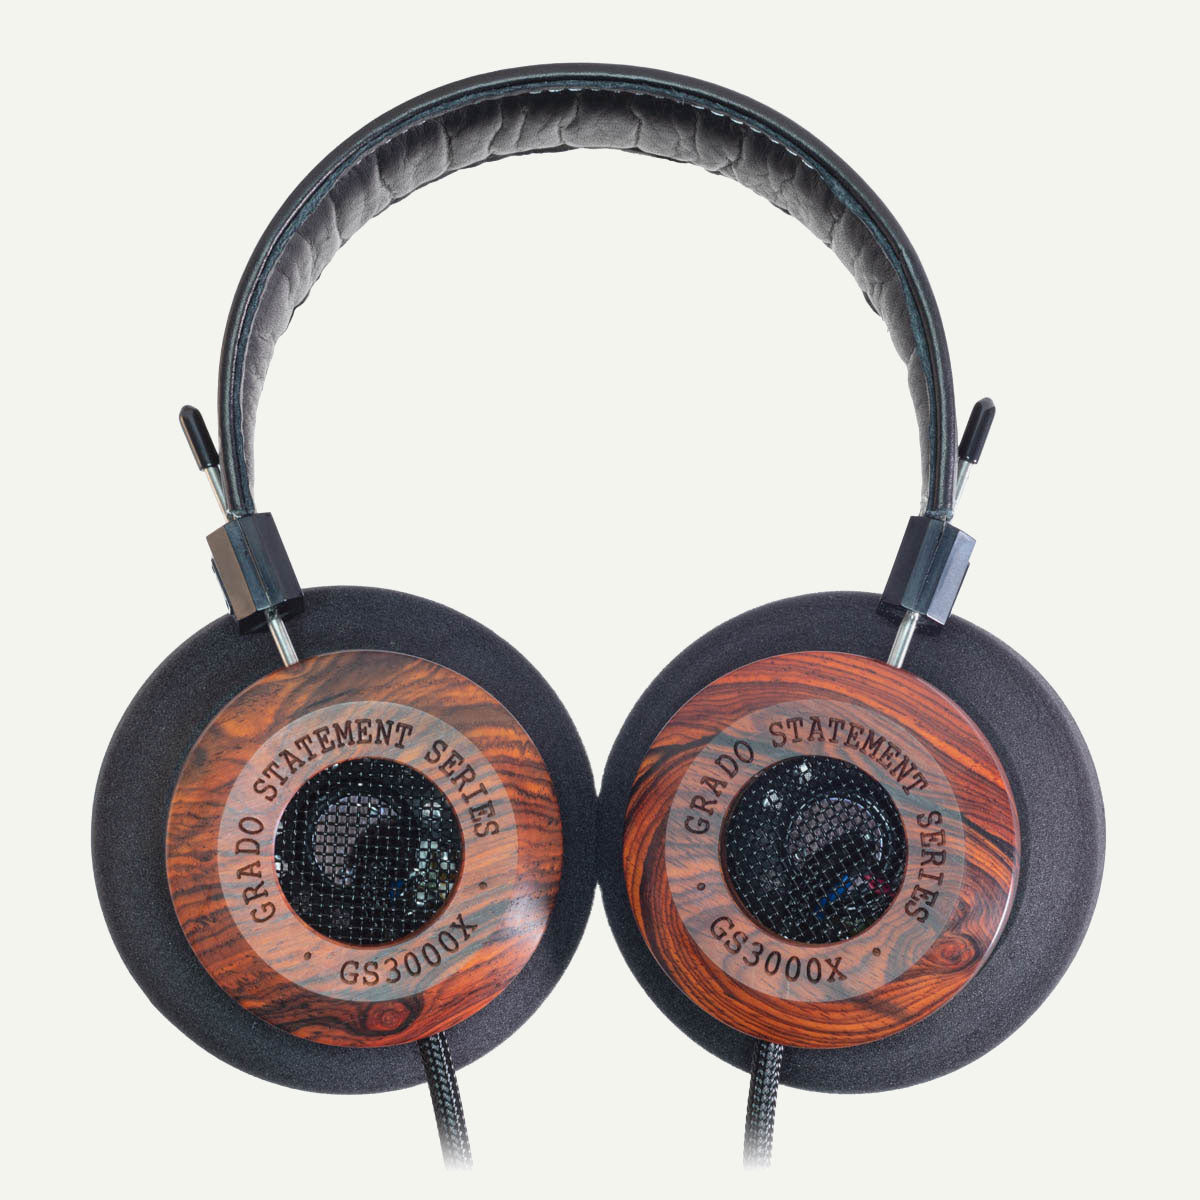 Get the price on all Grado Headphones and Grado Cartridges: Grado SR325x - Grado SR60x - Grado GW100x - Grado GS3000x - Grado SR80x -Grado  GS1000x - Grado Prestige Series - Grado Lineage Series - Grado Timbre Series - Grado Black3 / Green3 - Grado Prestige Series - Grado Timbre Series - Grado Lineage Series - Grado Specialty Series... 